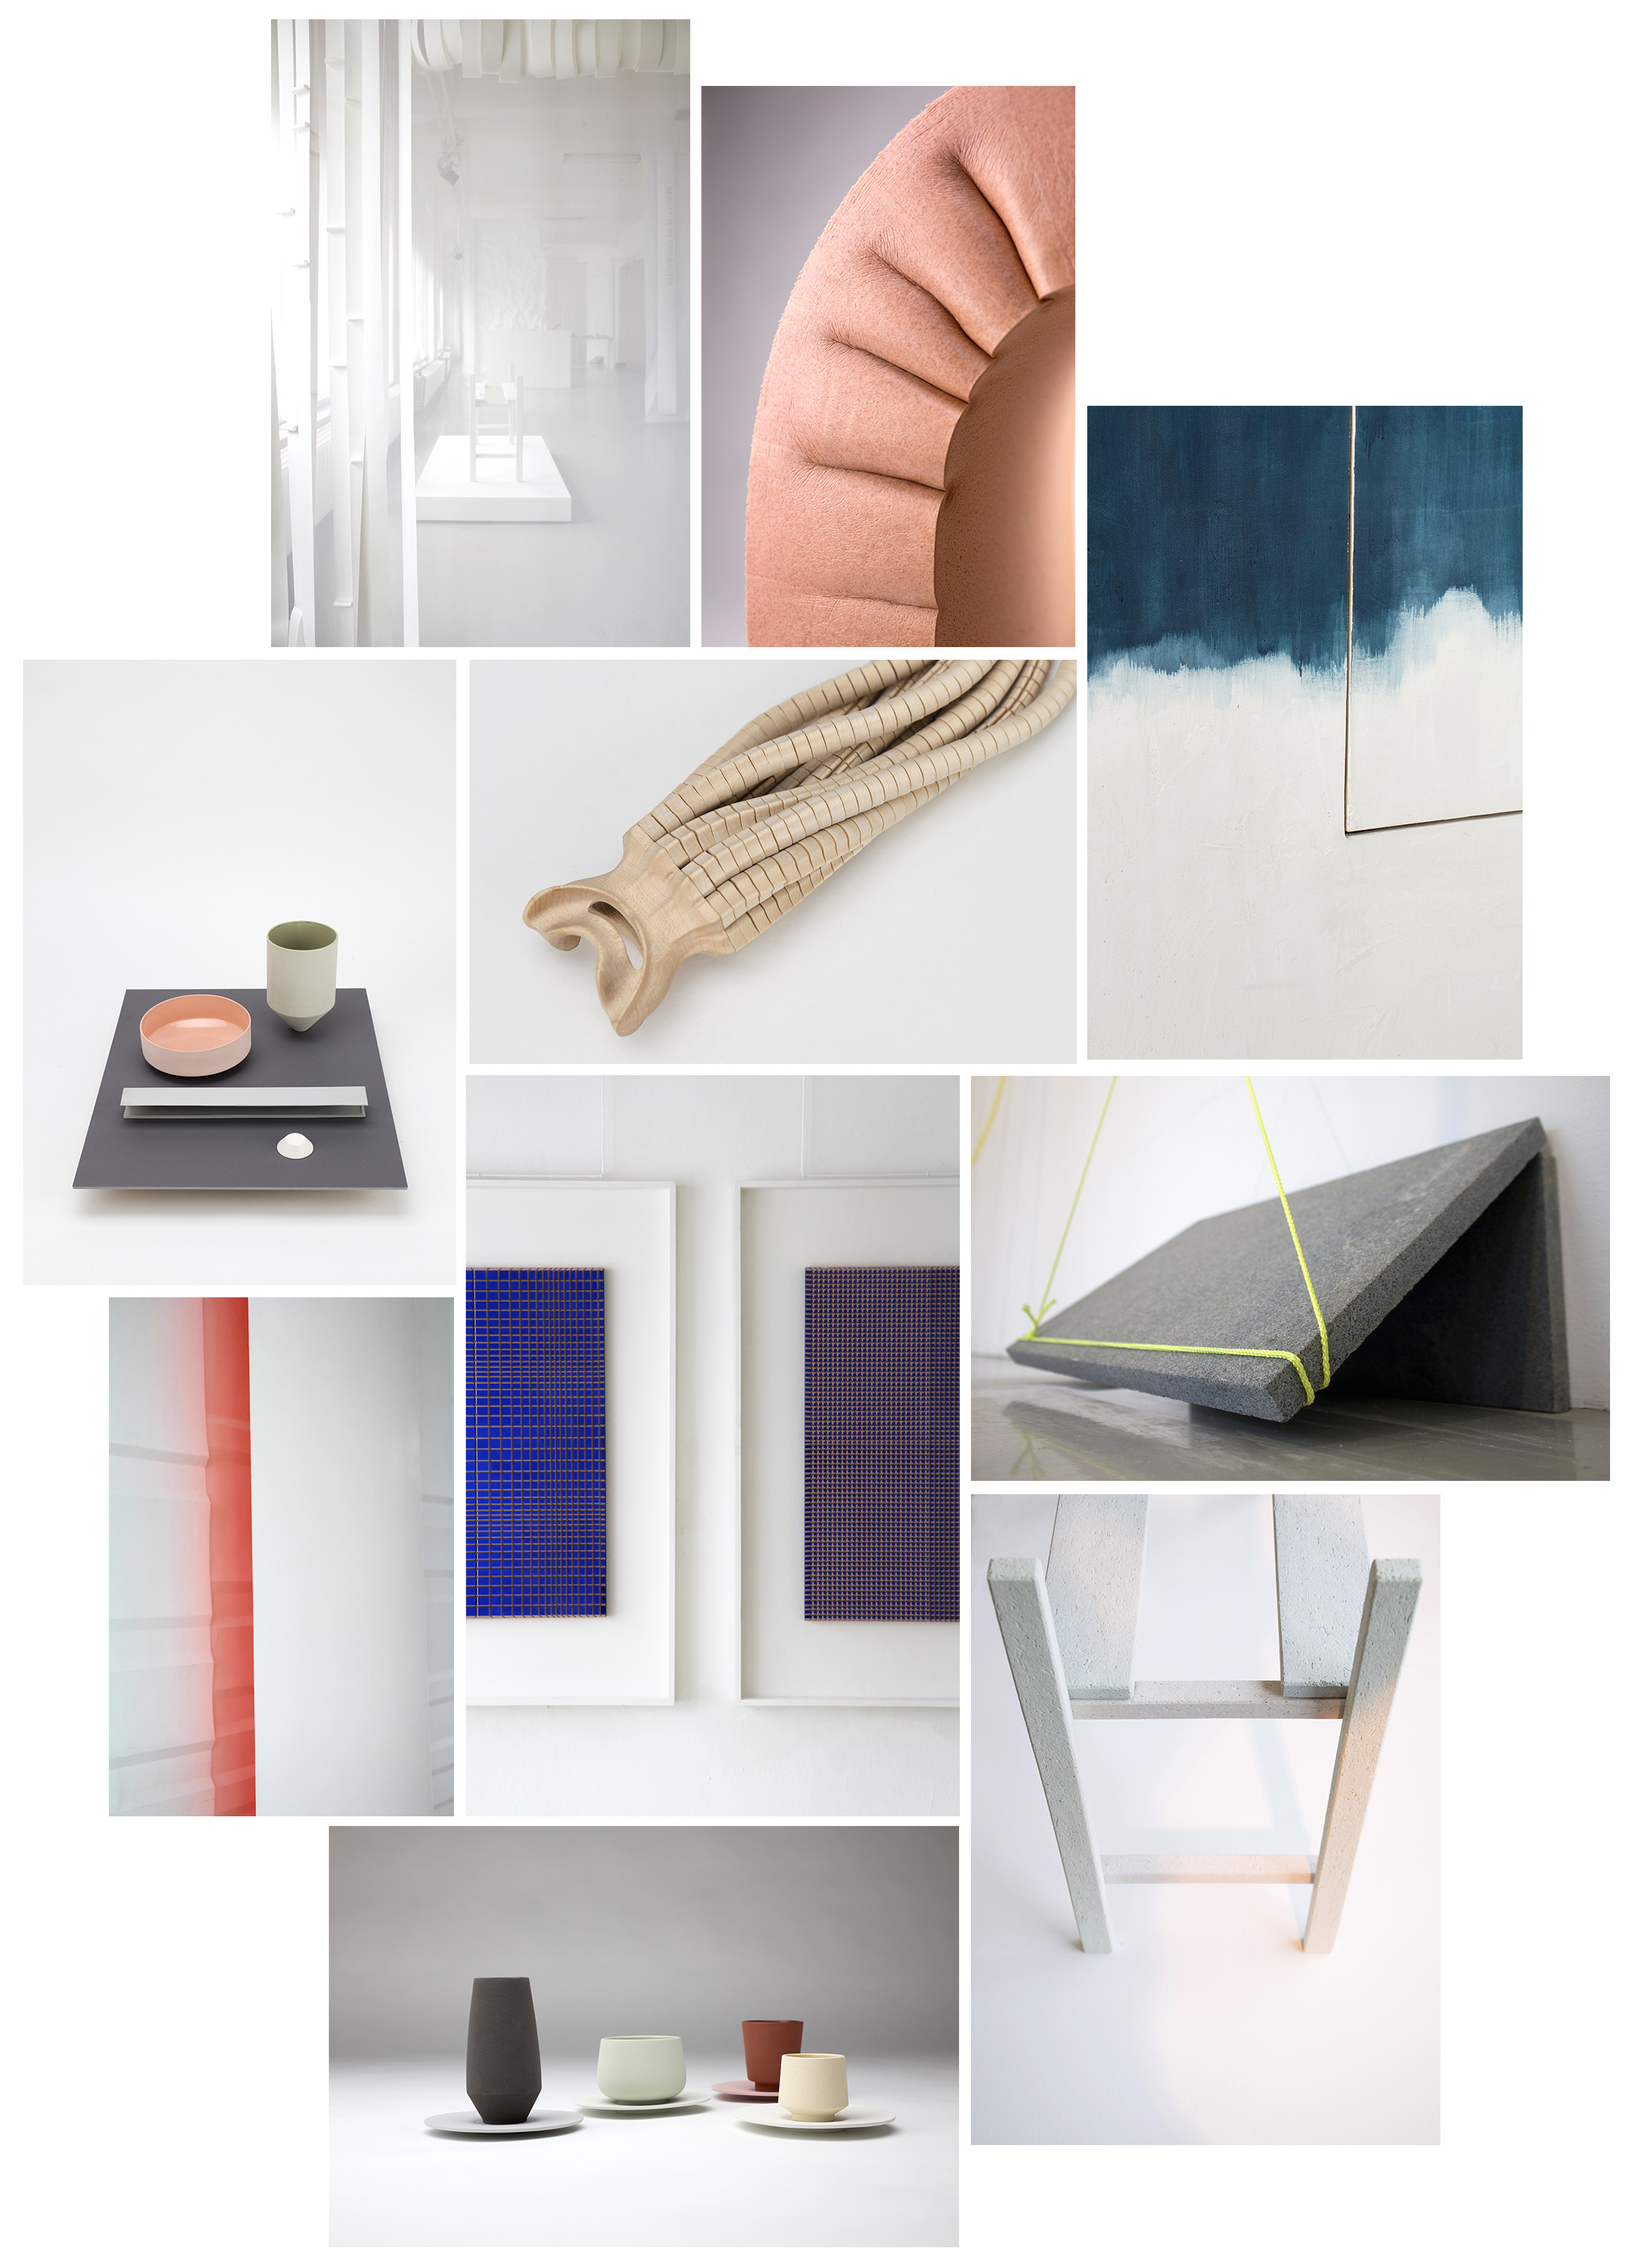 DUTCH DESIGN WEEK 2015: BLANCCOLLECTIVE’S CONCEPTS OF BEAUTY